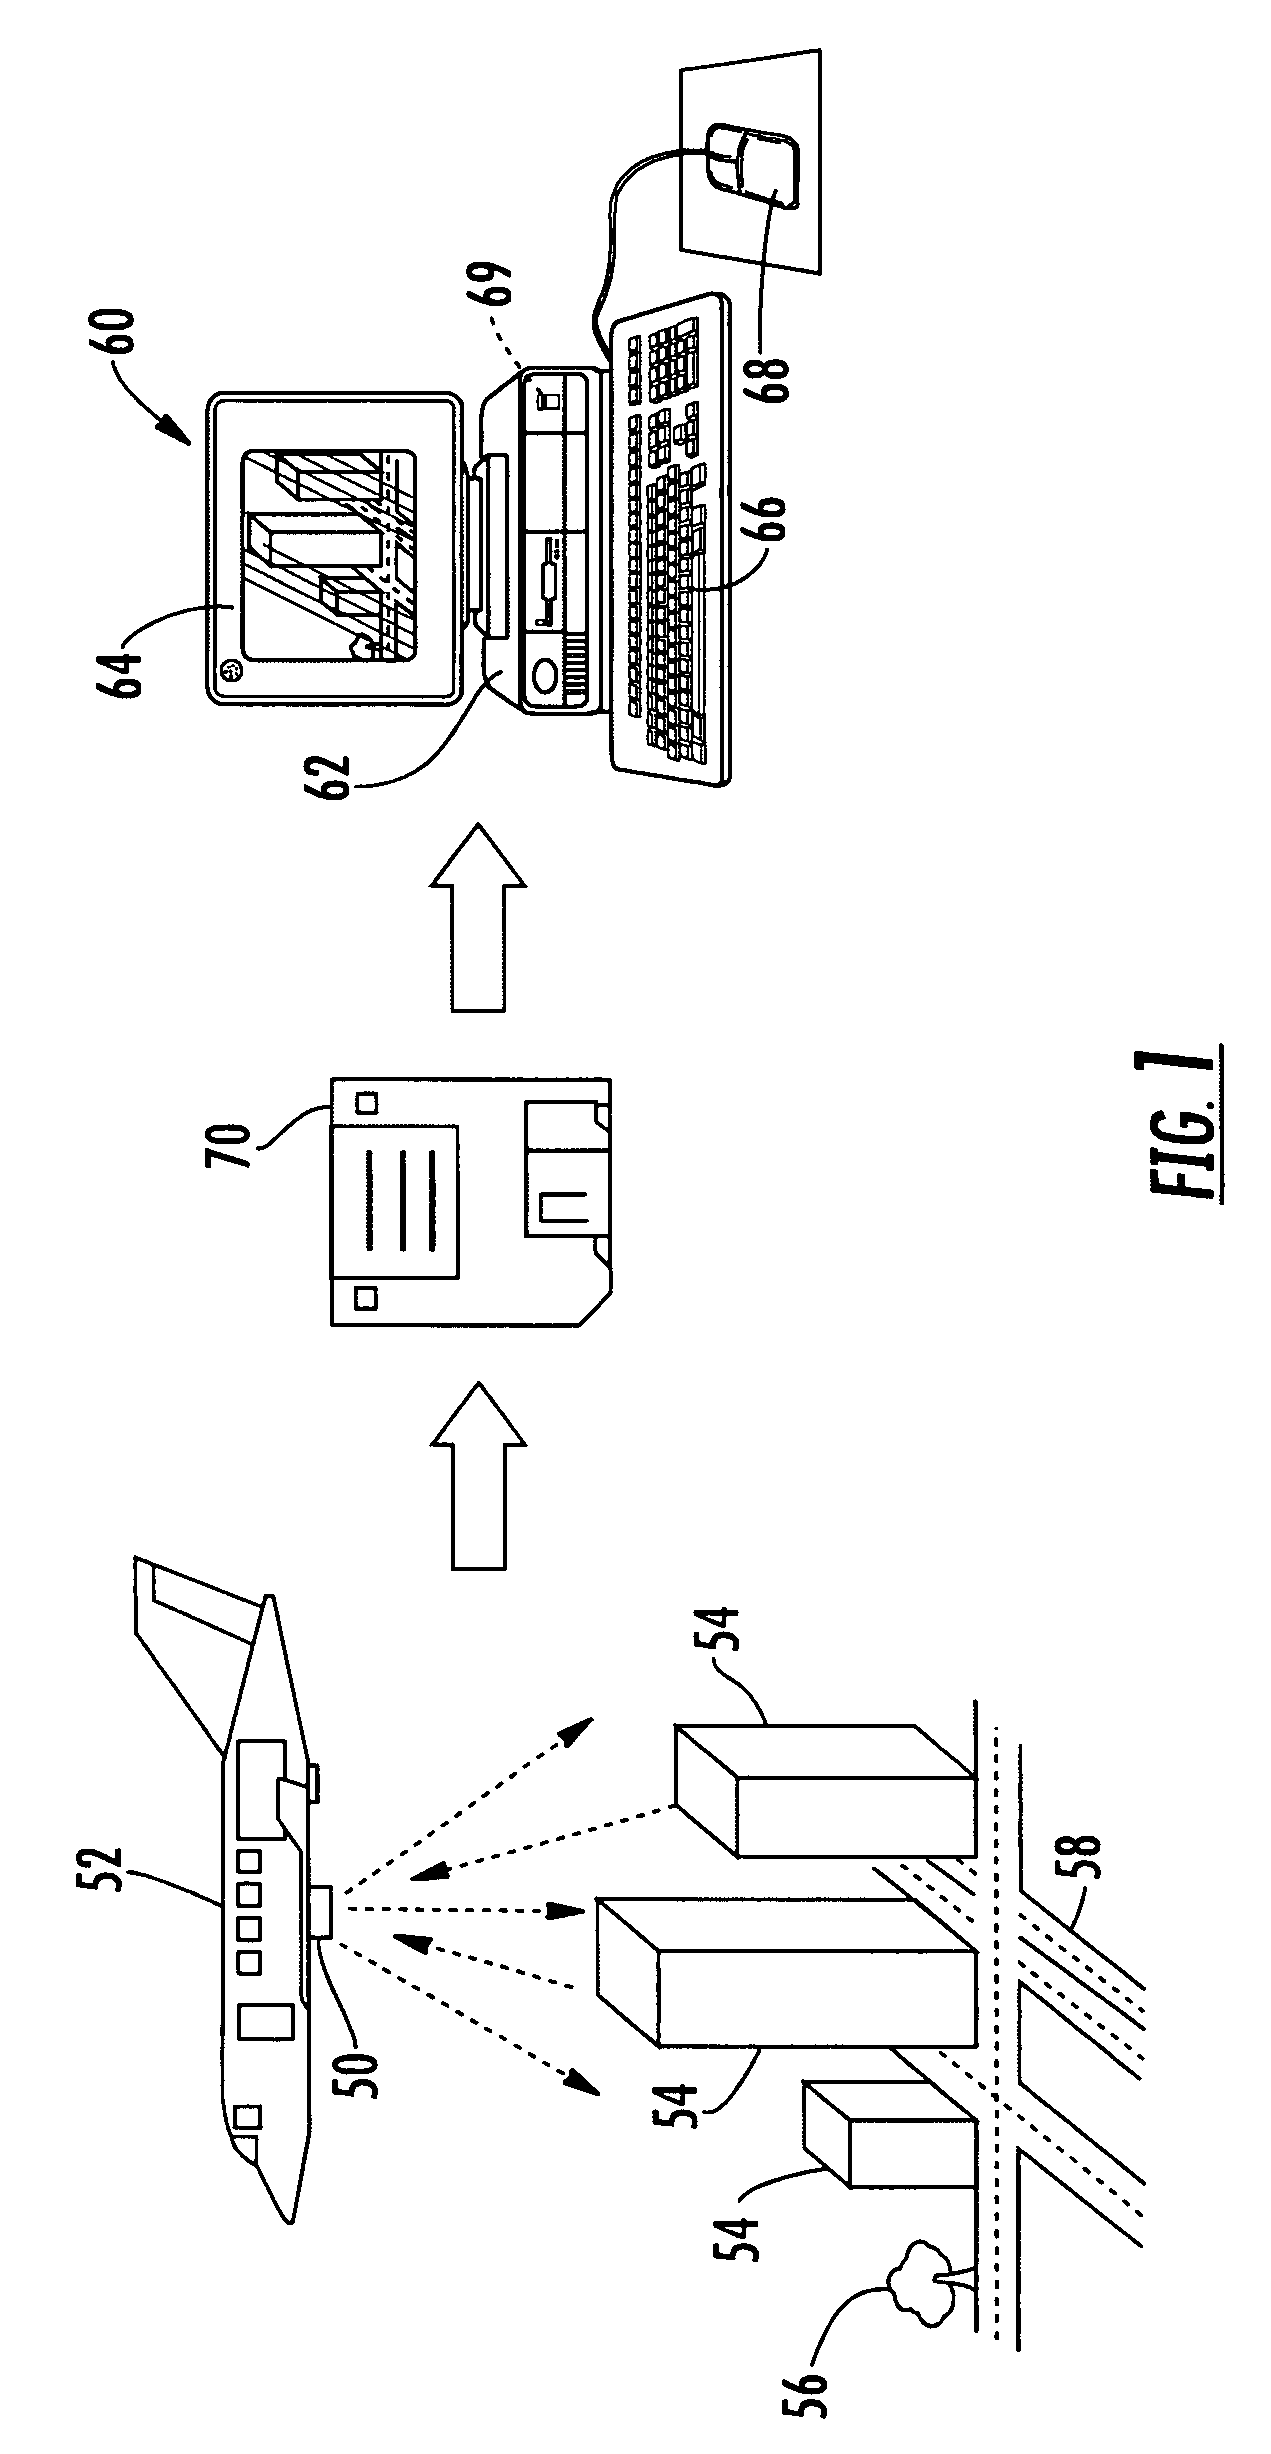 Method and apparatus for processing SAR images based on an anisotropic diffusion filtering algorithm